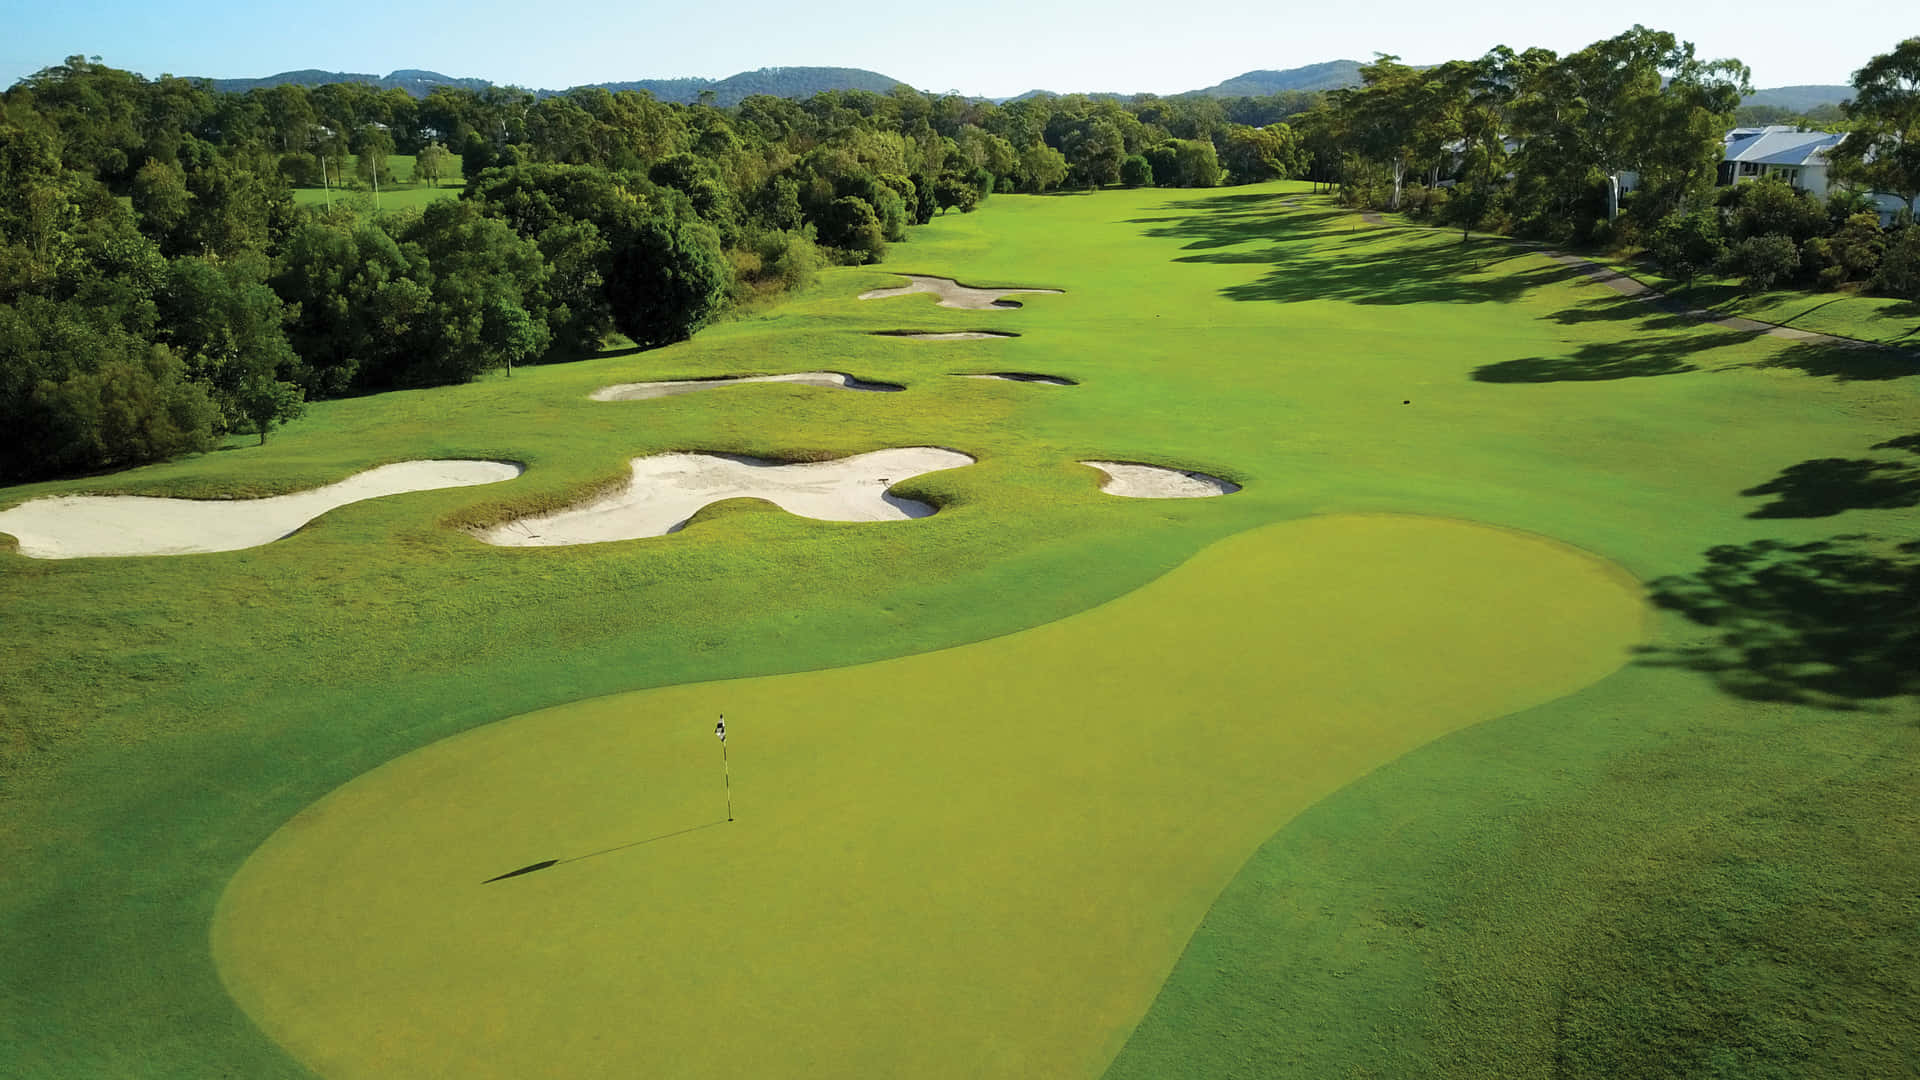 Enjoy a peaceful morning at this picturesque golf course